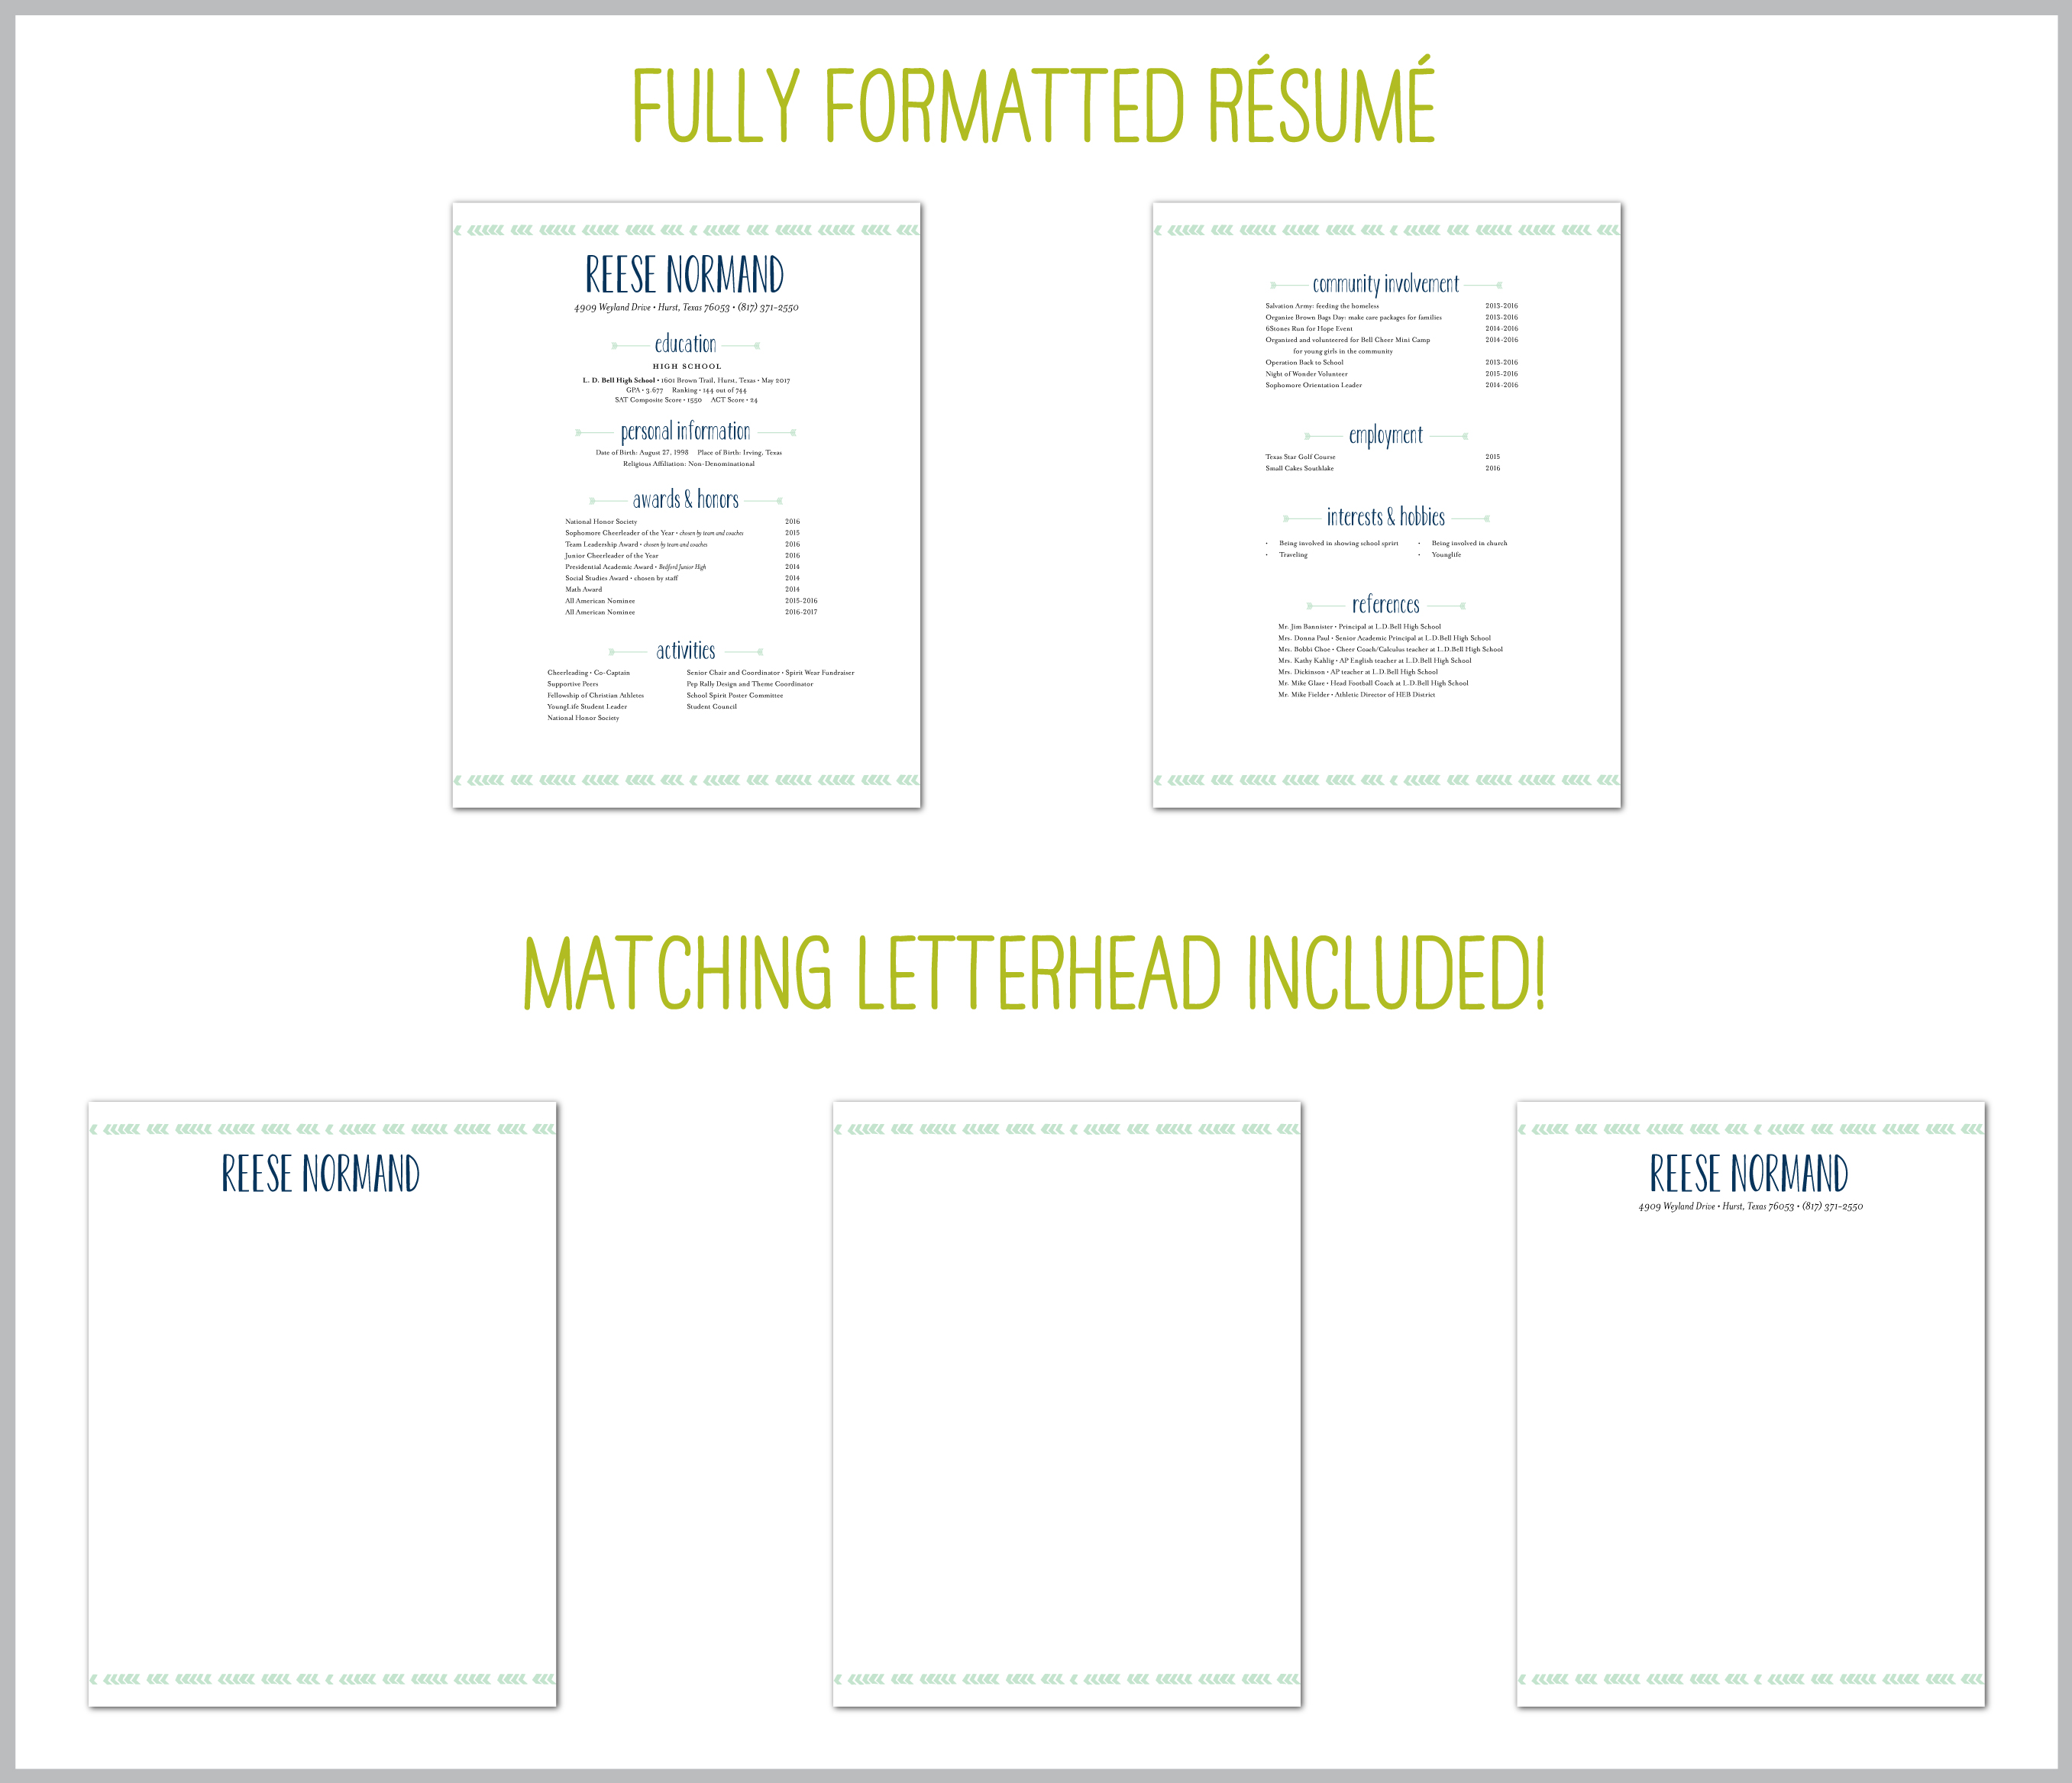 Resume Components